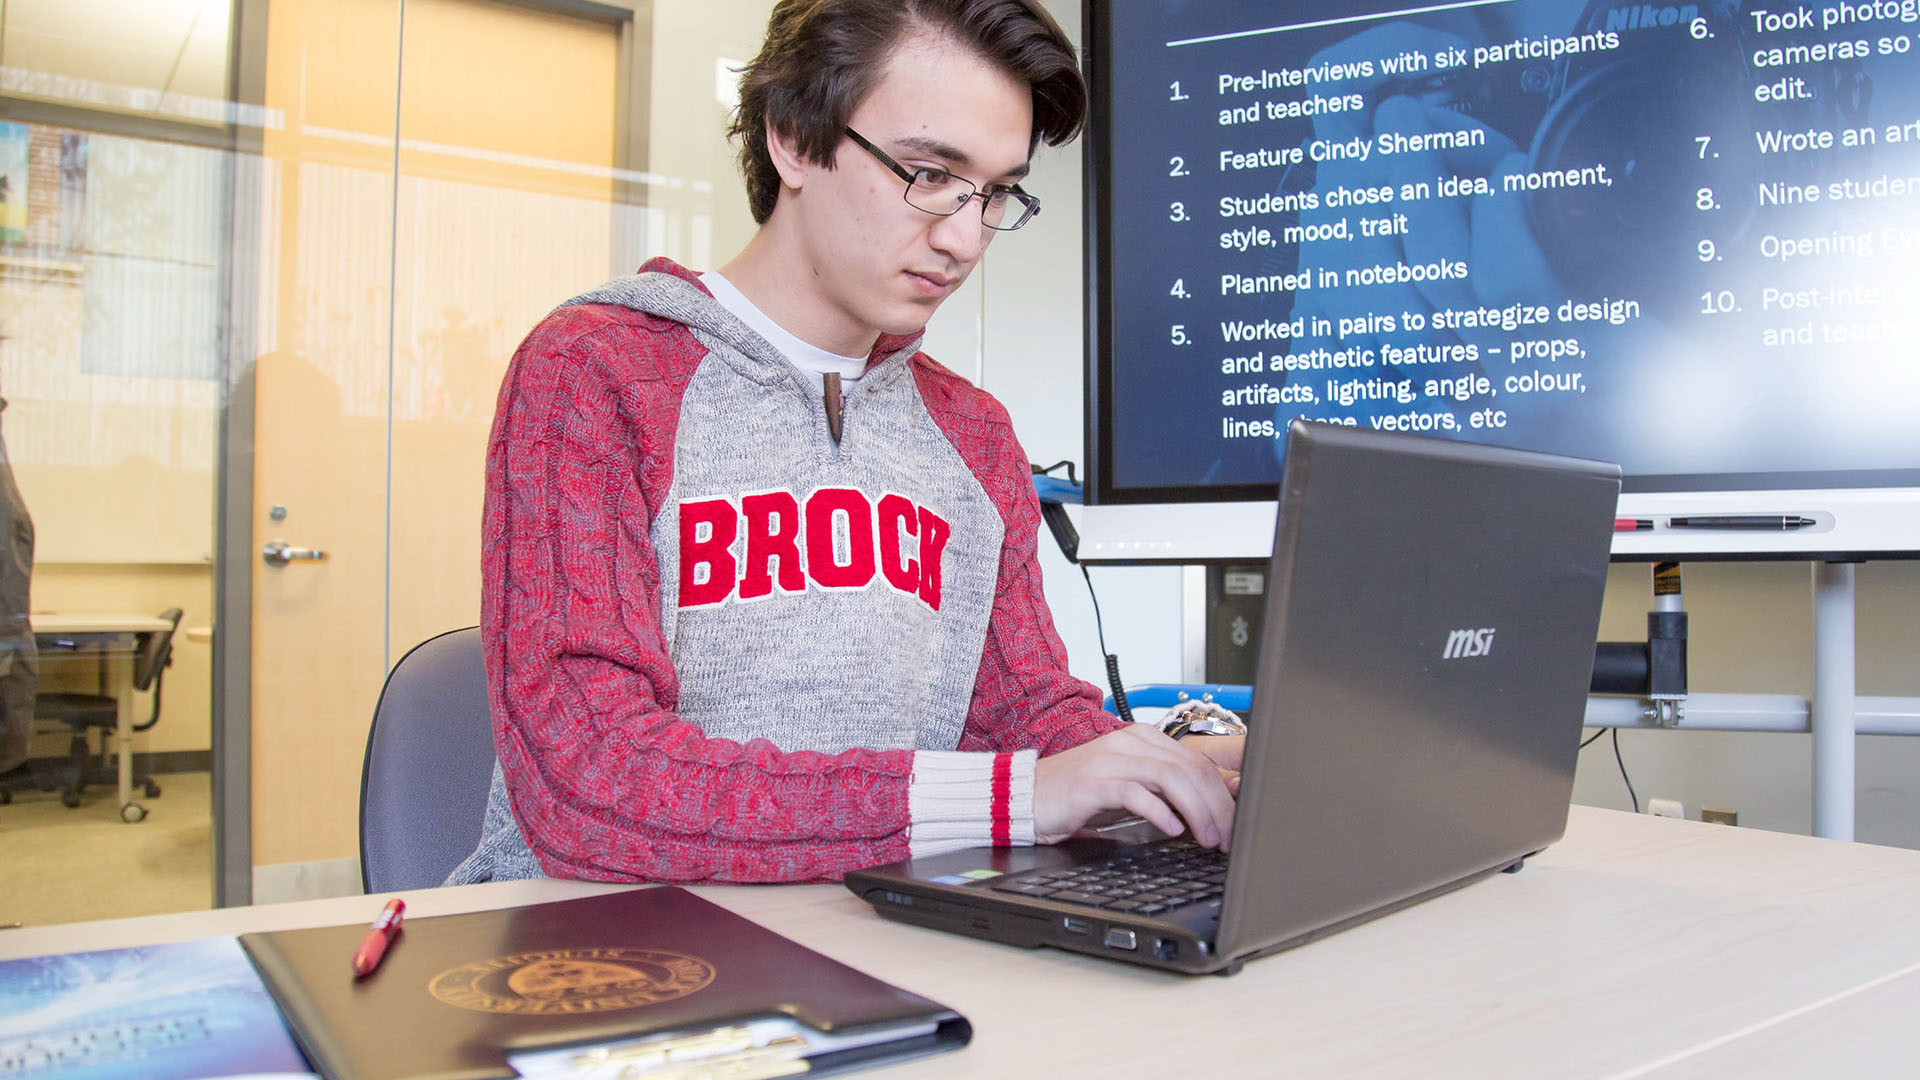 Graduate student works on a laptop